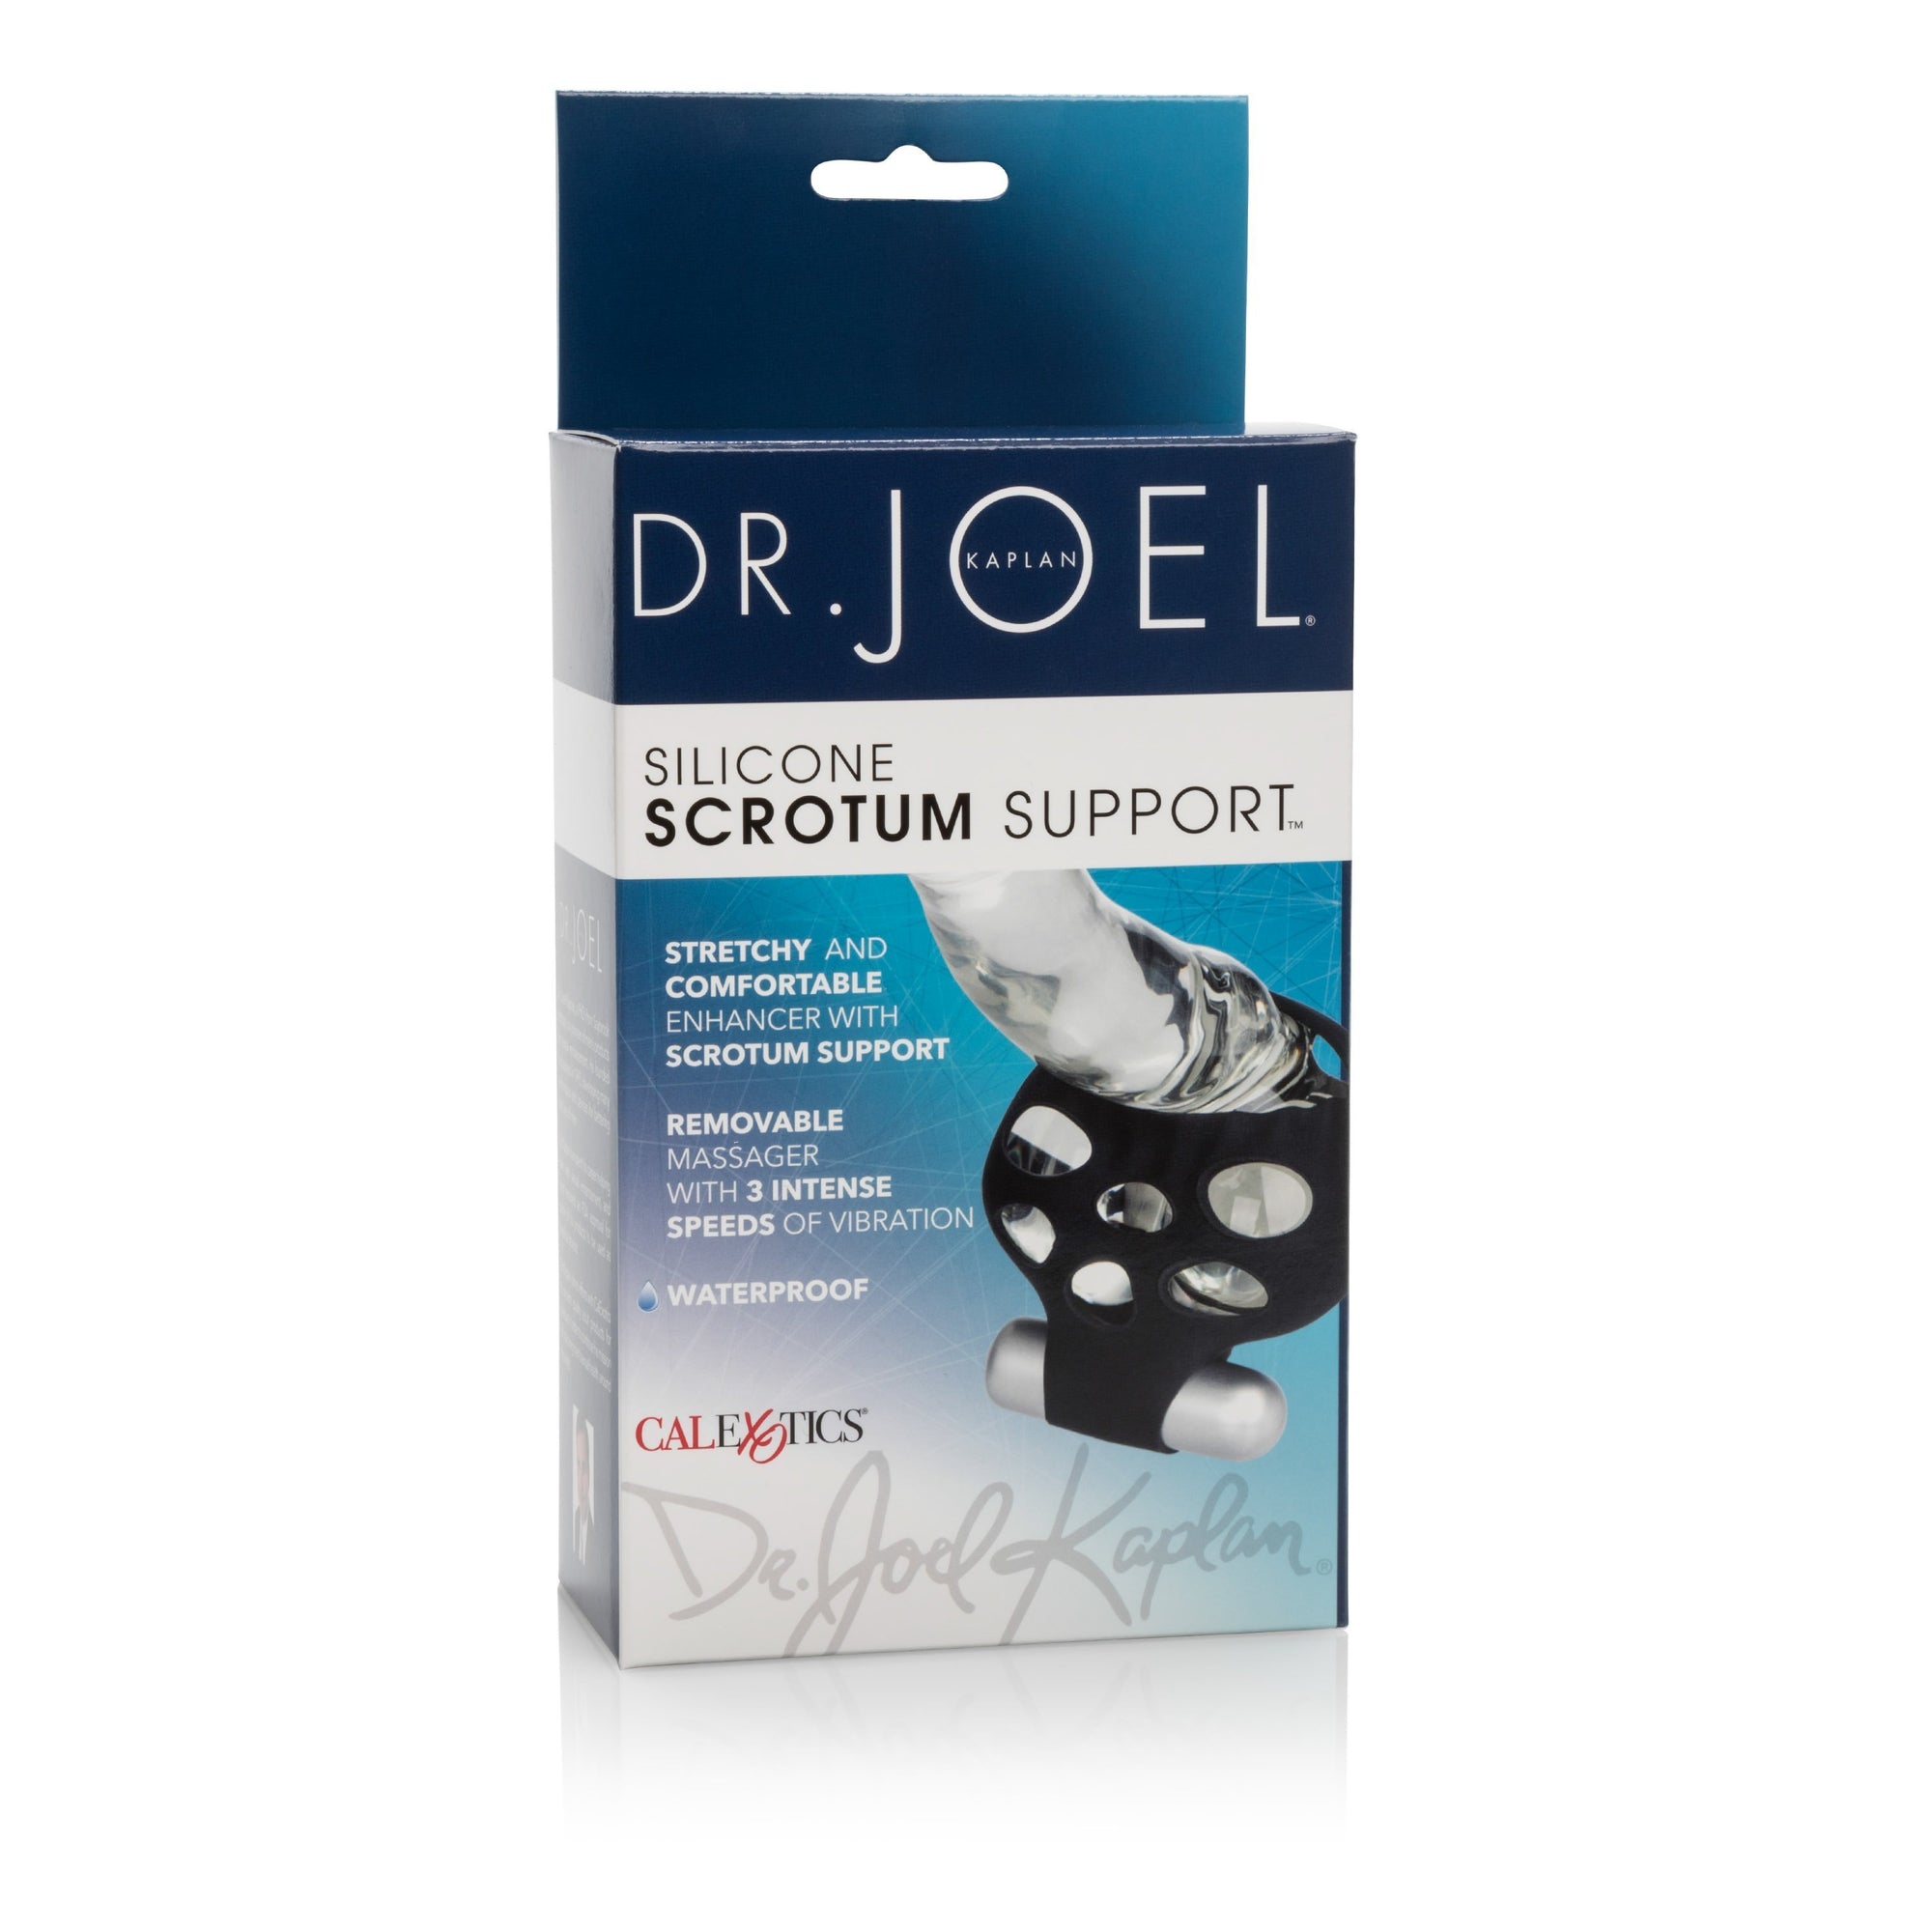 California Exotics - Dr. Joel Kaplan Silicone Scrotum Support (Black) Silicone Cock Ring (Vibration) Non Rechargeable Singapore